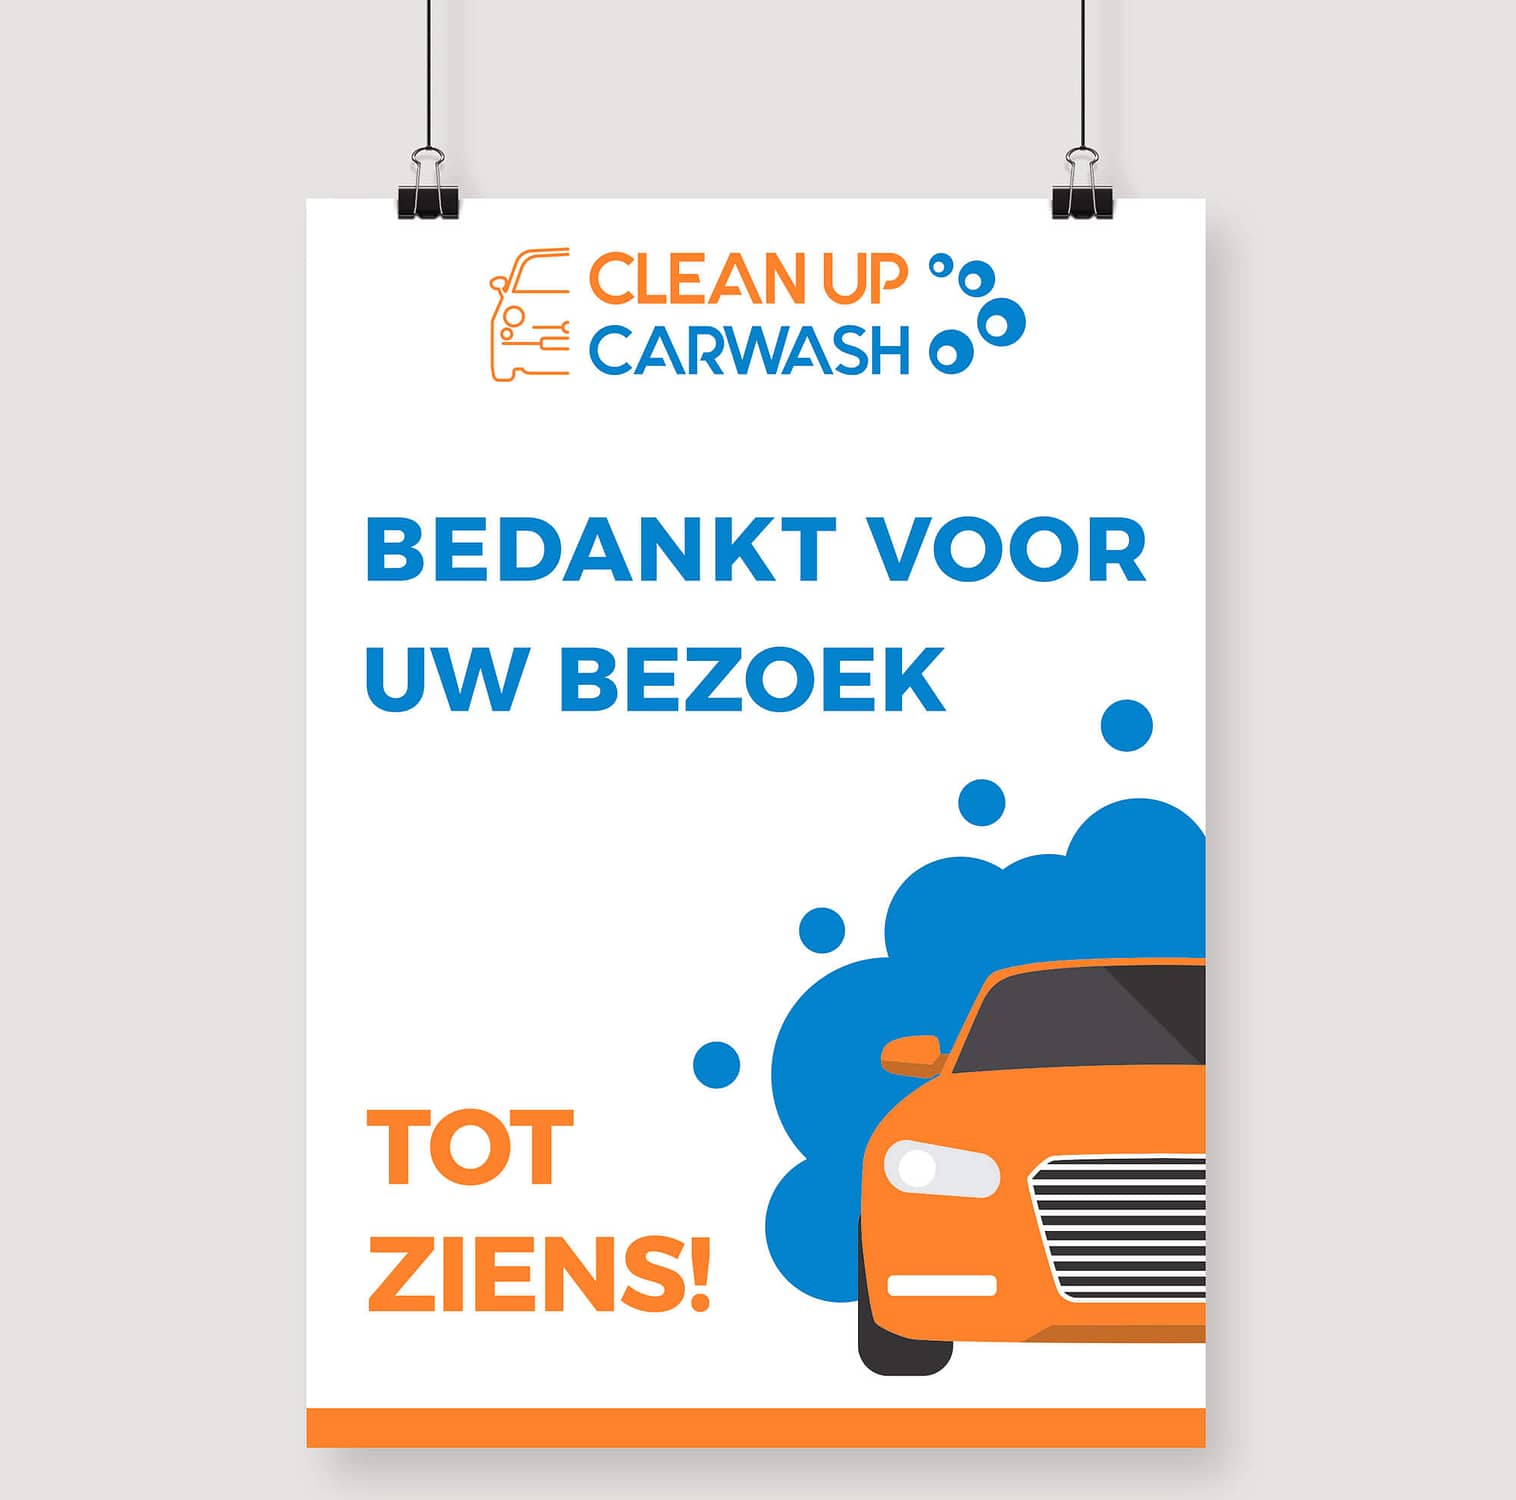 Carwash thank you for your visit poster design